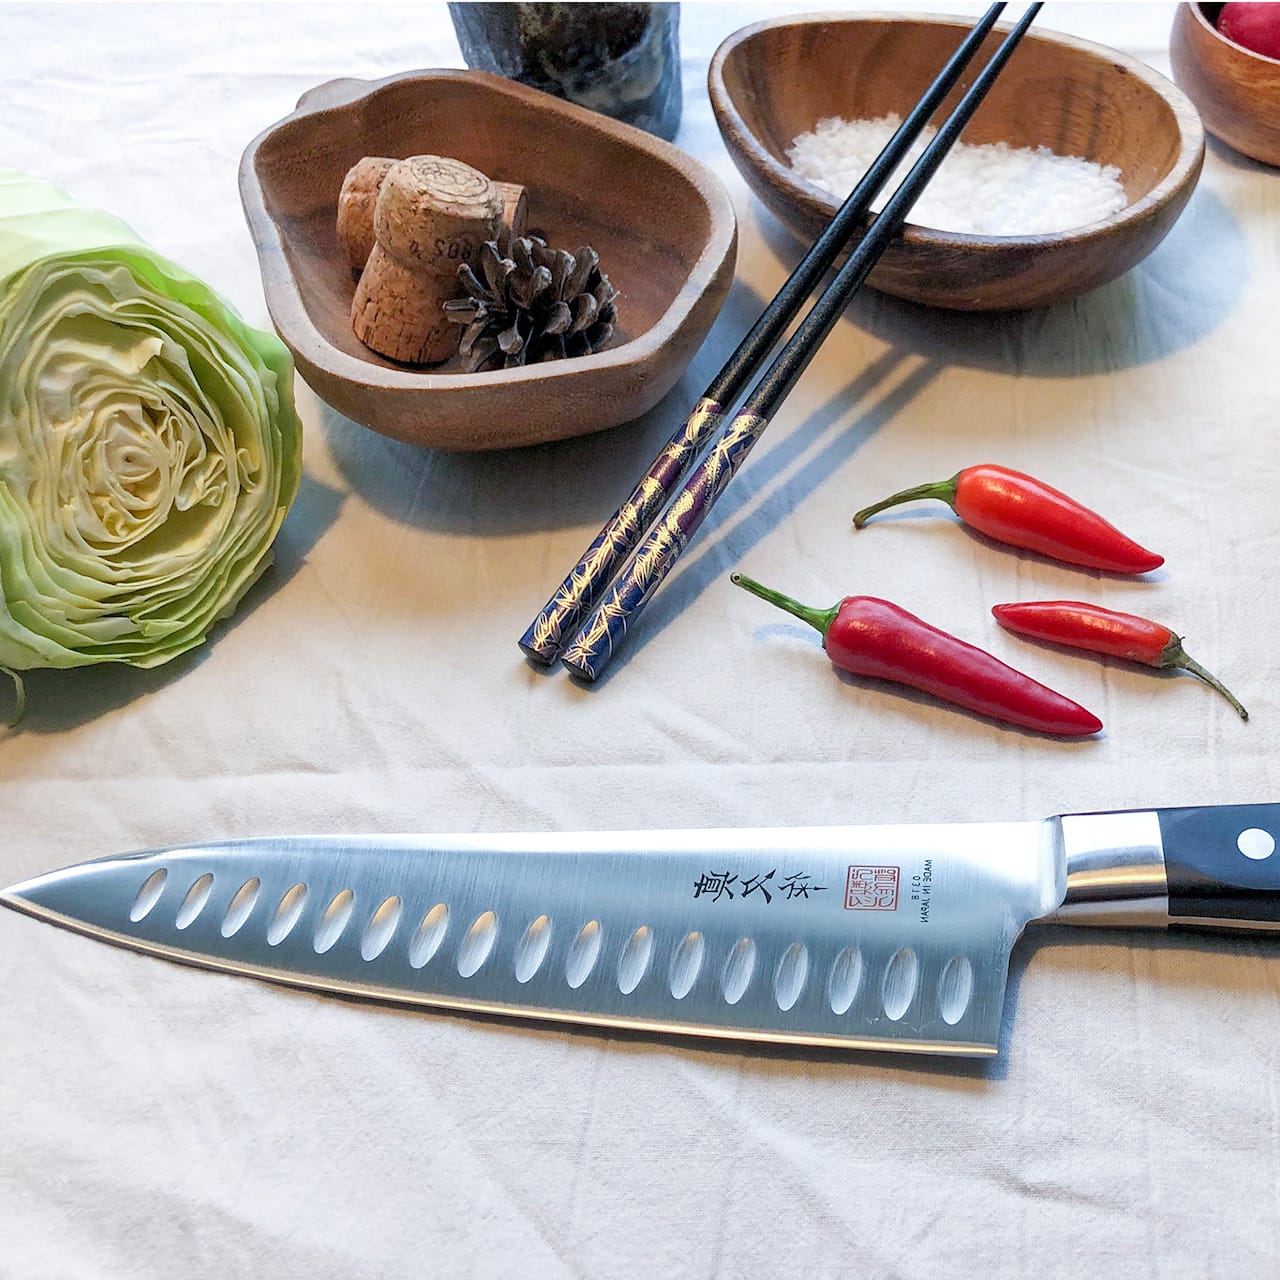 Mighty - Chef's knife with olive sharpening, 20 cm